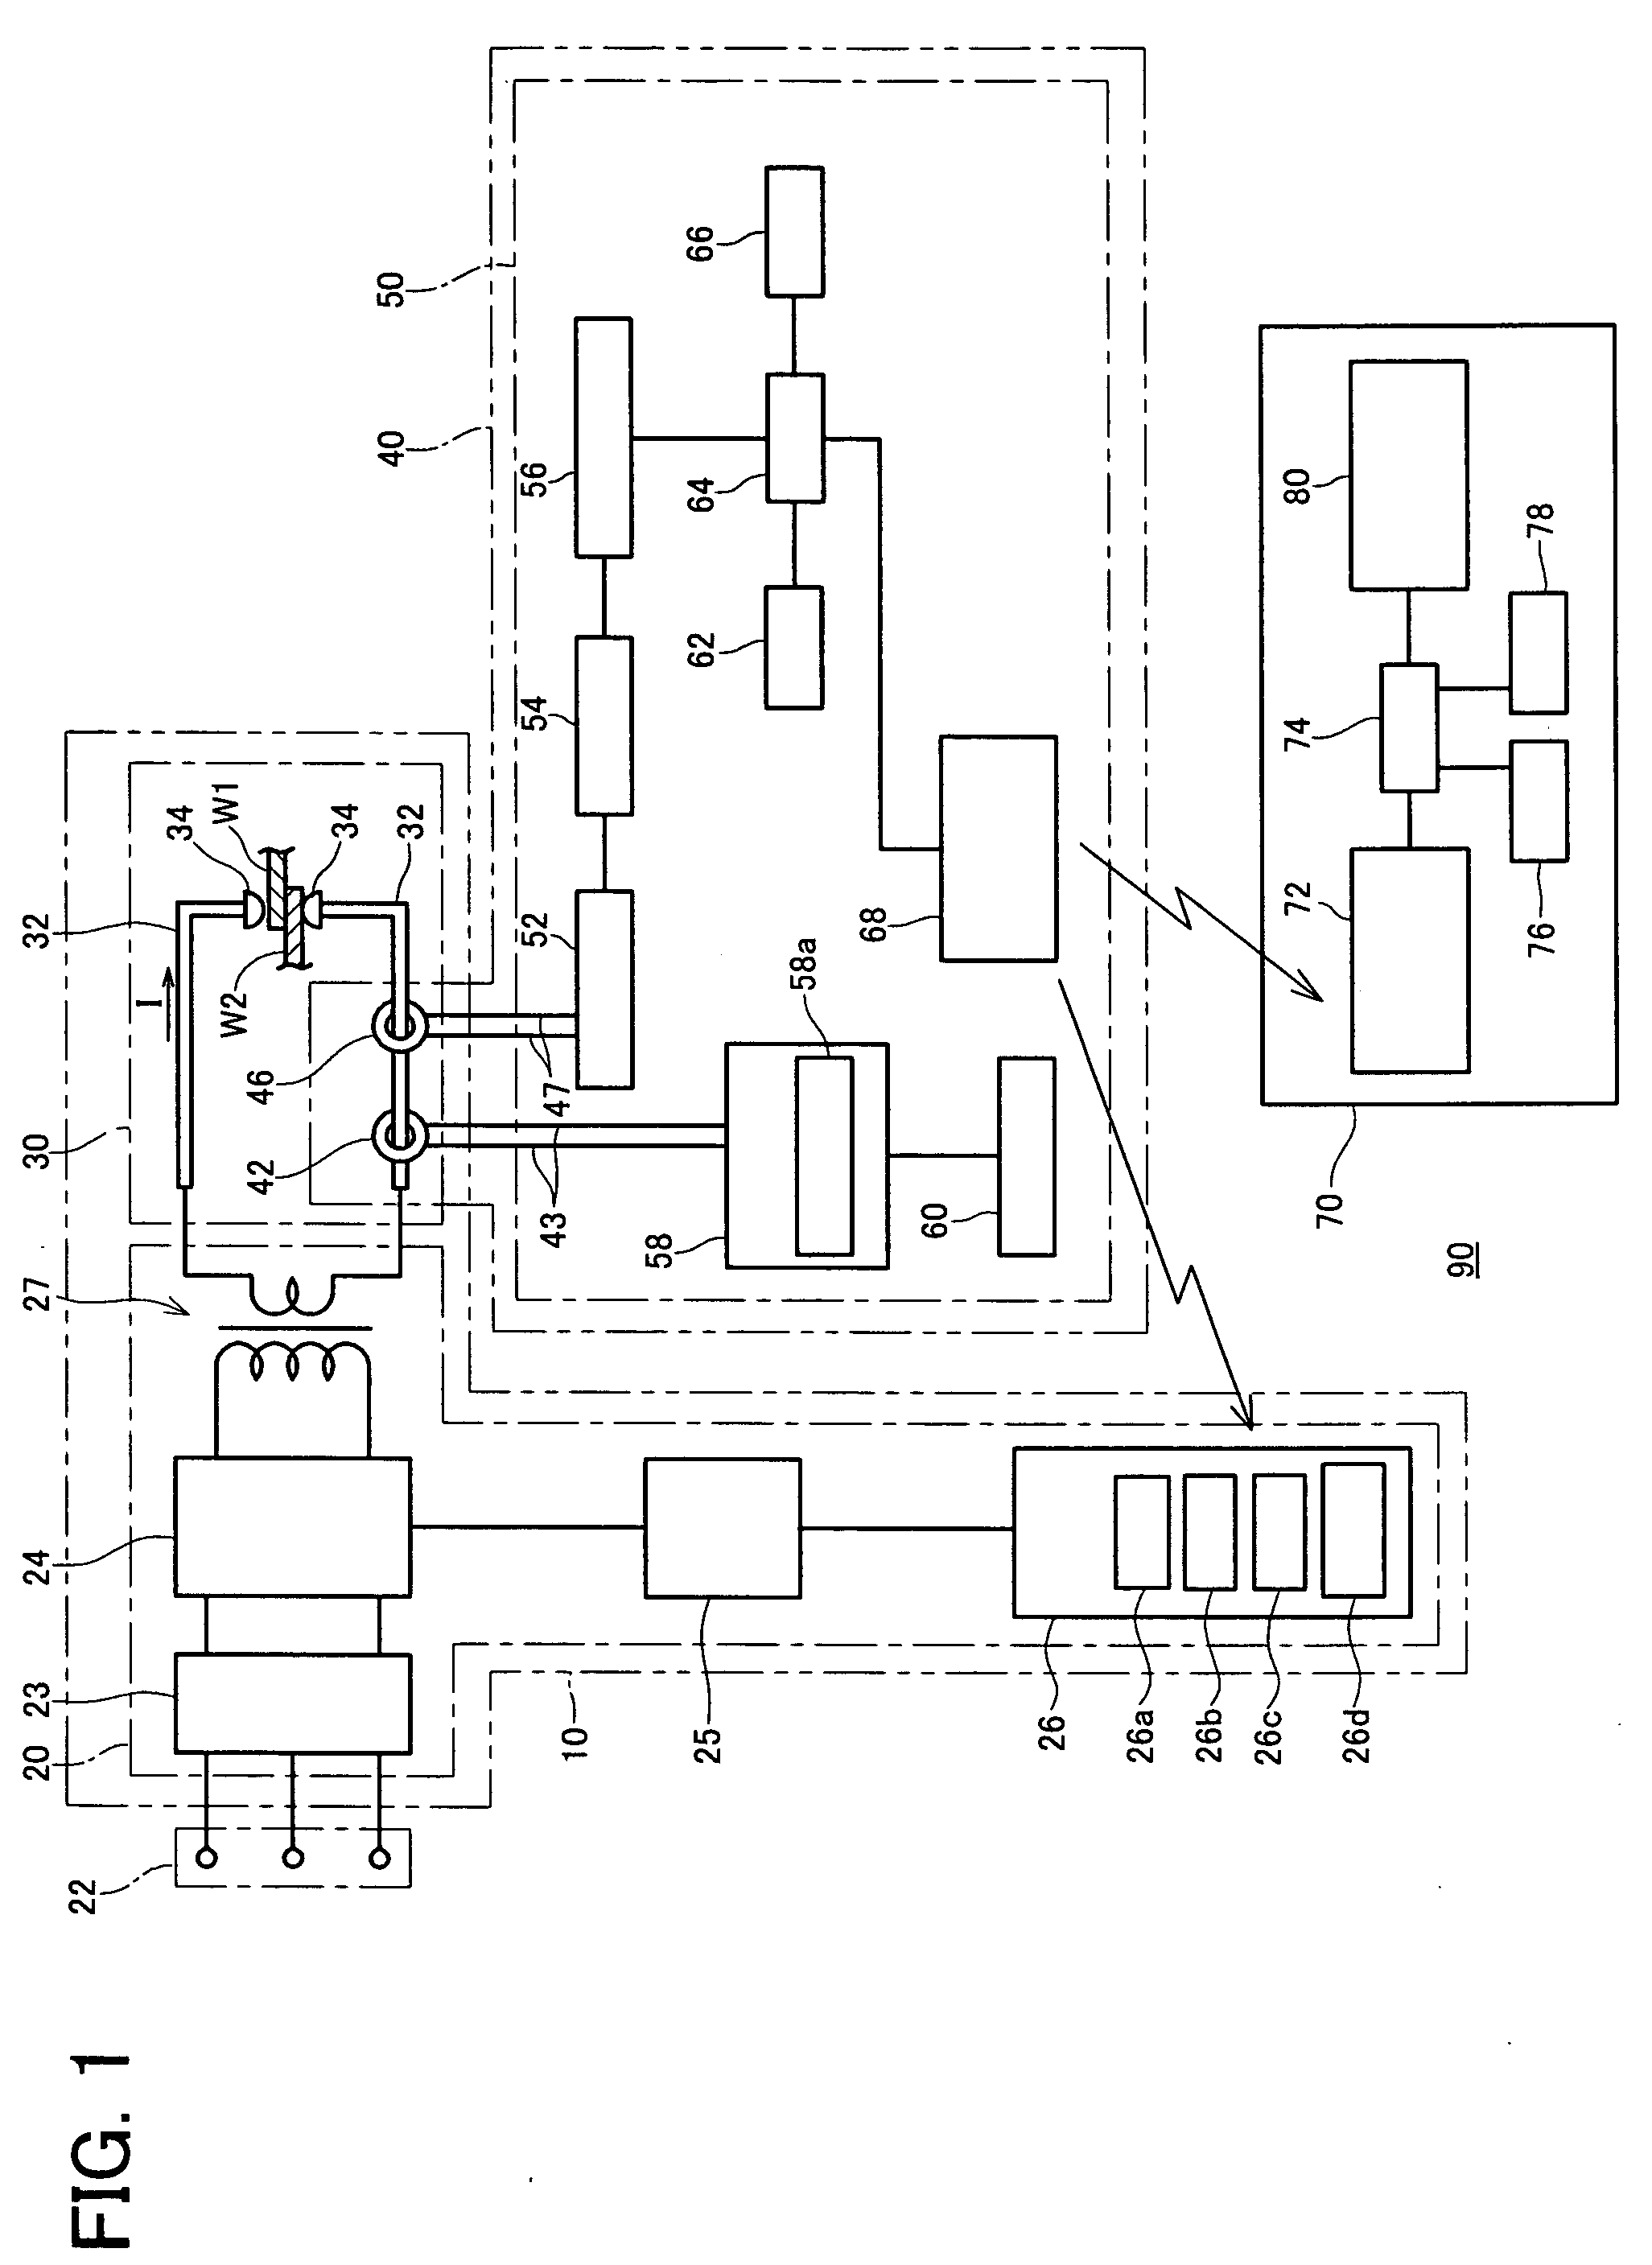 Welding state detecting and transmitting device for resistance-welding machine